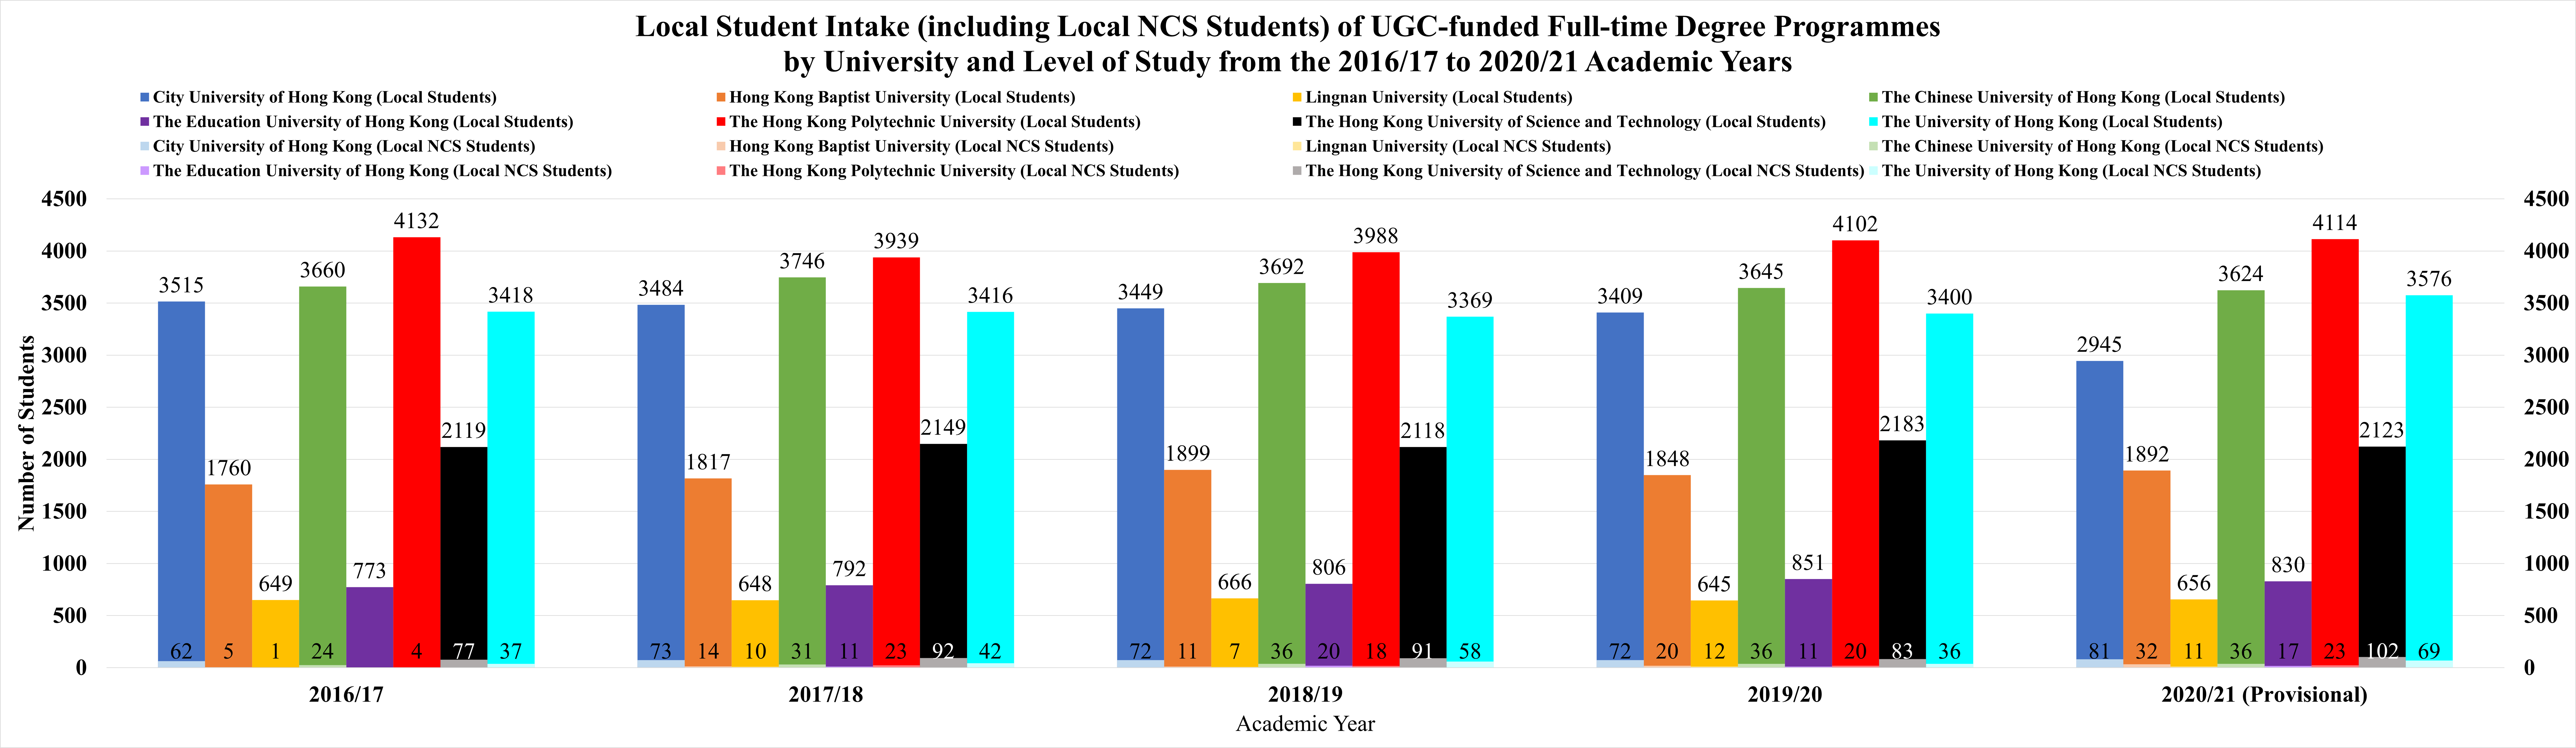 Local Student Intake (including Local NCS Students) of UGC-funded Full-time Degree Programmes  by University and Level of Study from the 2016/17 to 2020/21 Academic Years